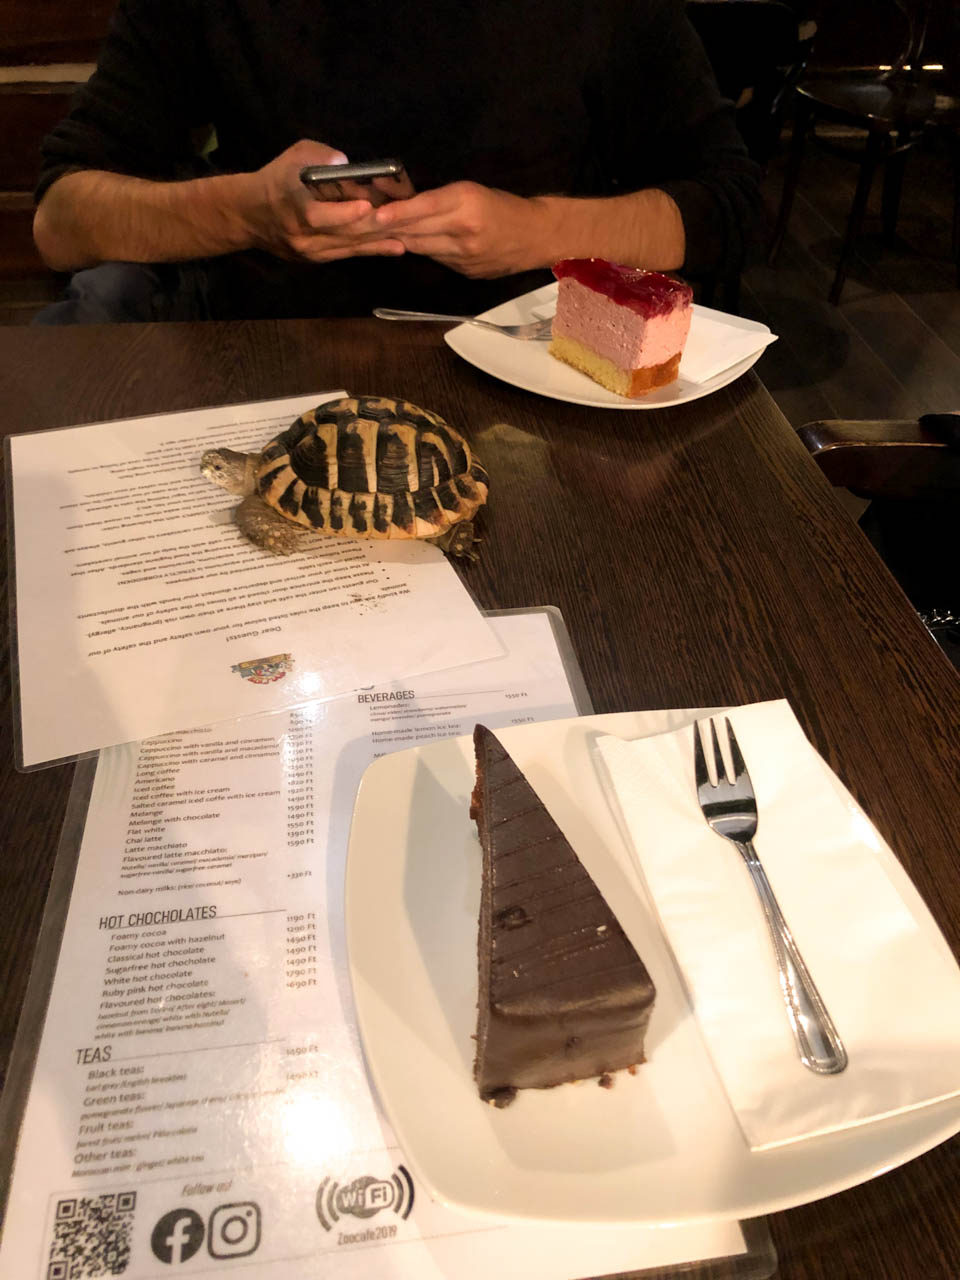 A turtle sitting on a table between two pieces of cake